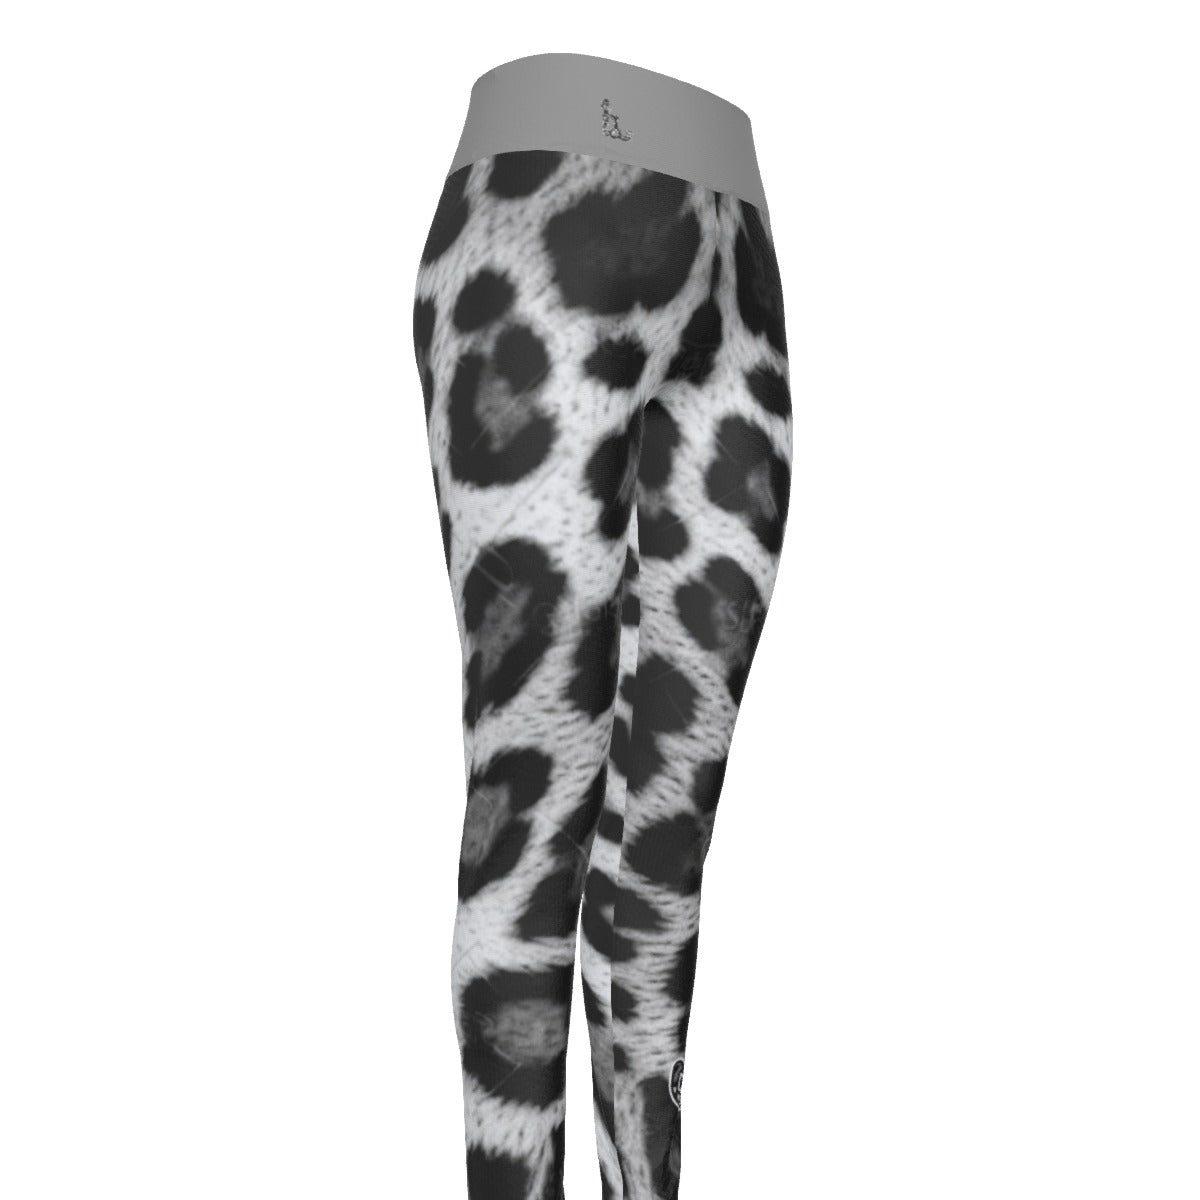 Officially Sexy Snow Leopard Print Collection Women's Grey High Waist Leggings #2 (English) 2